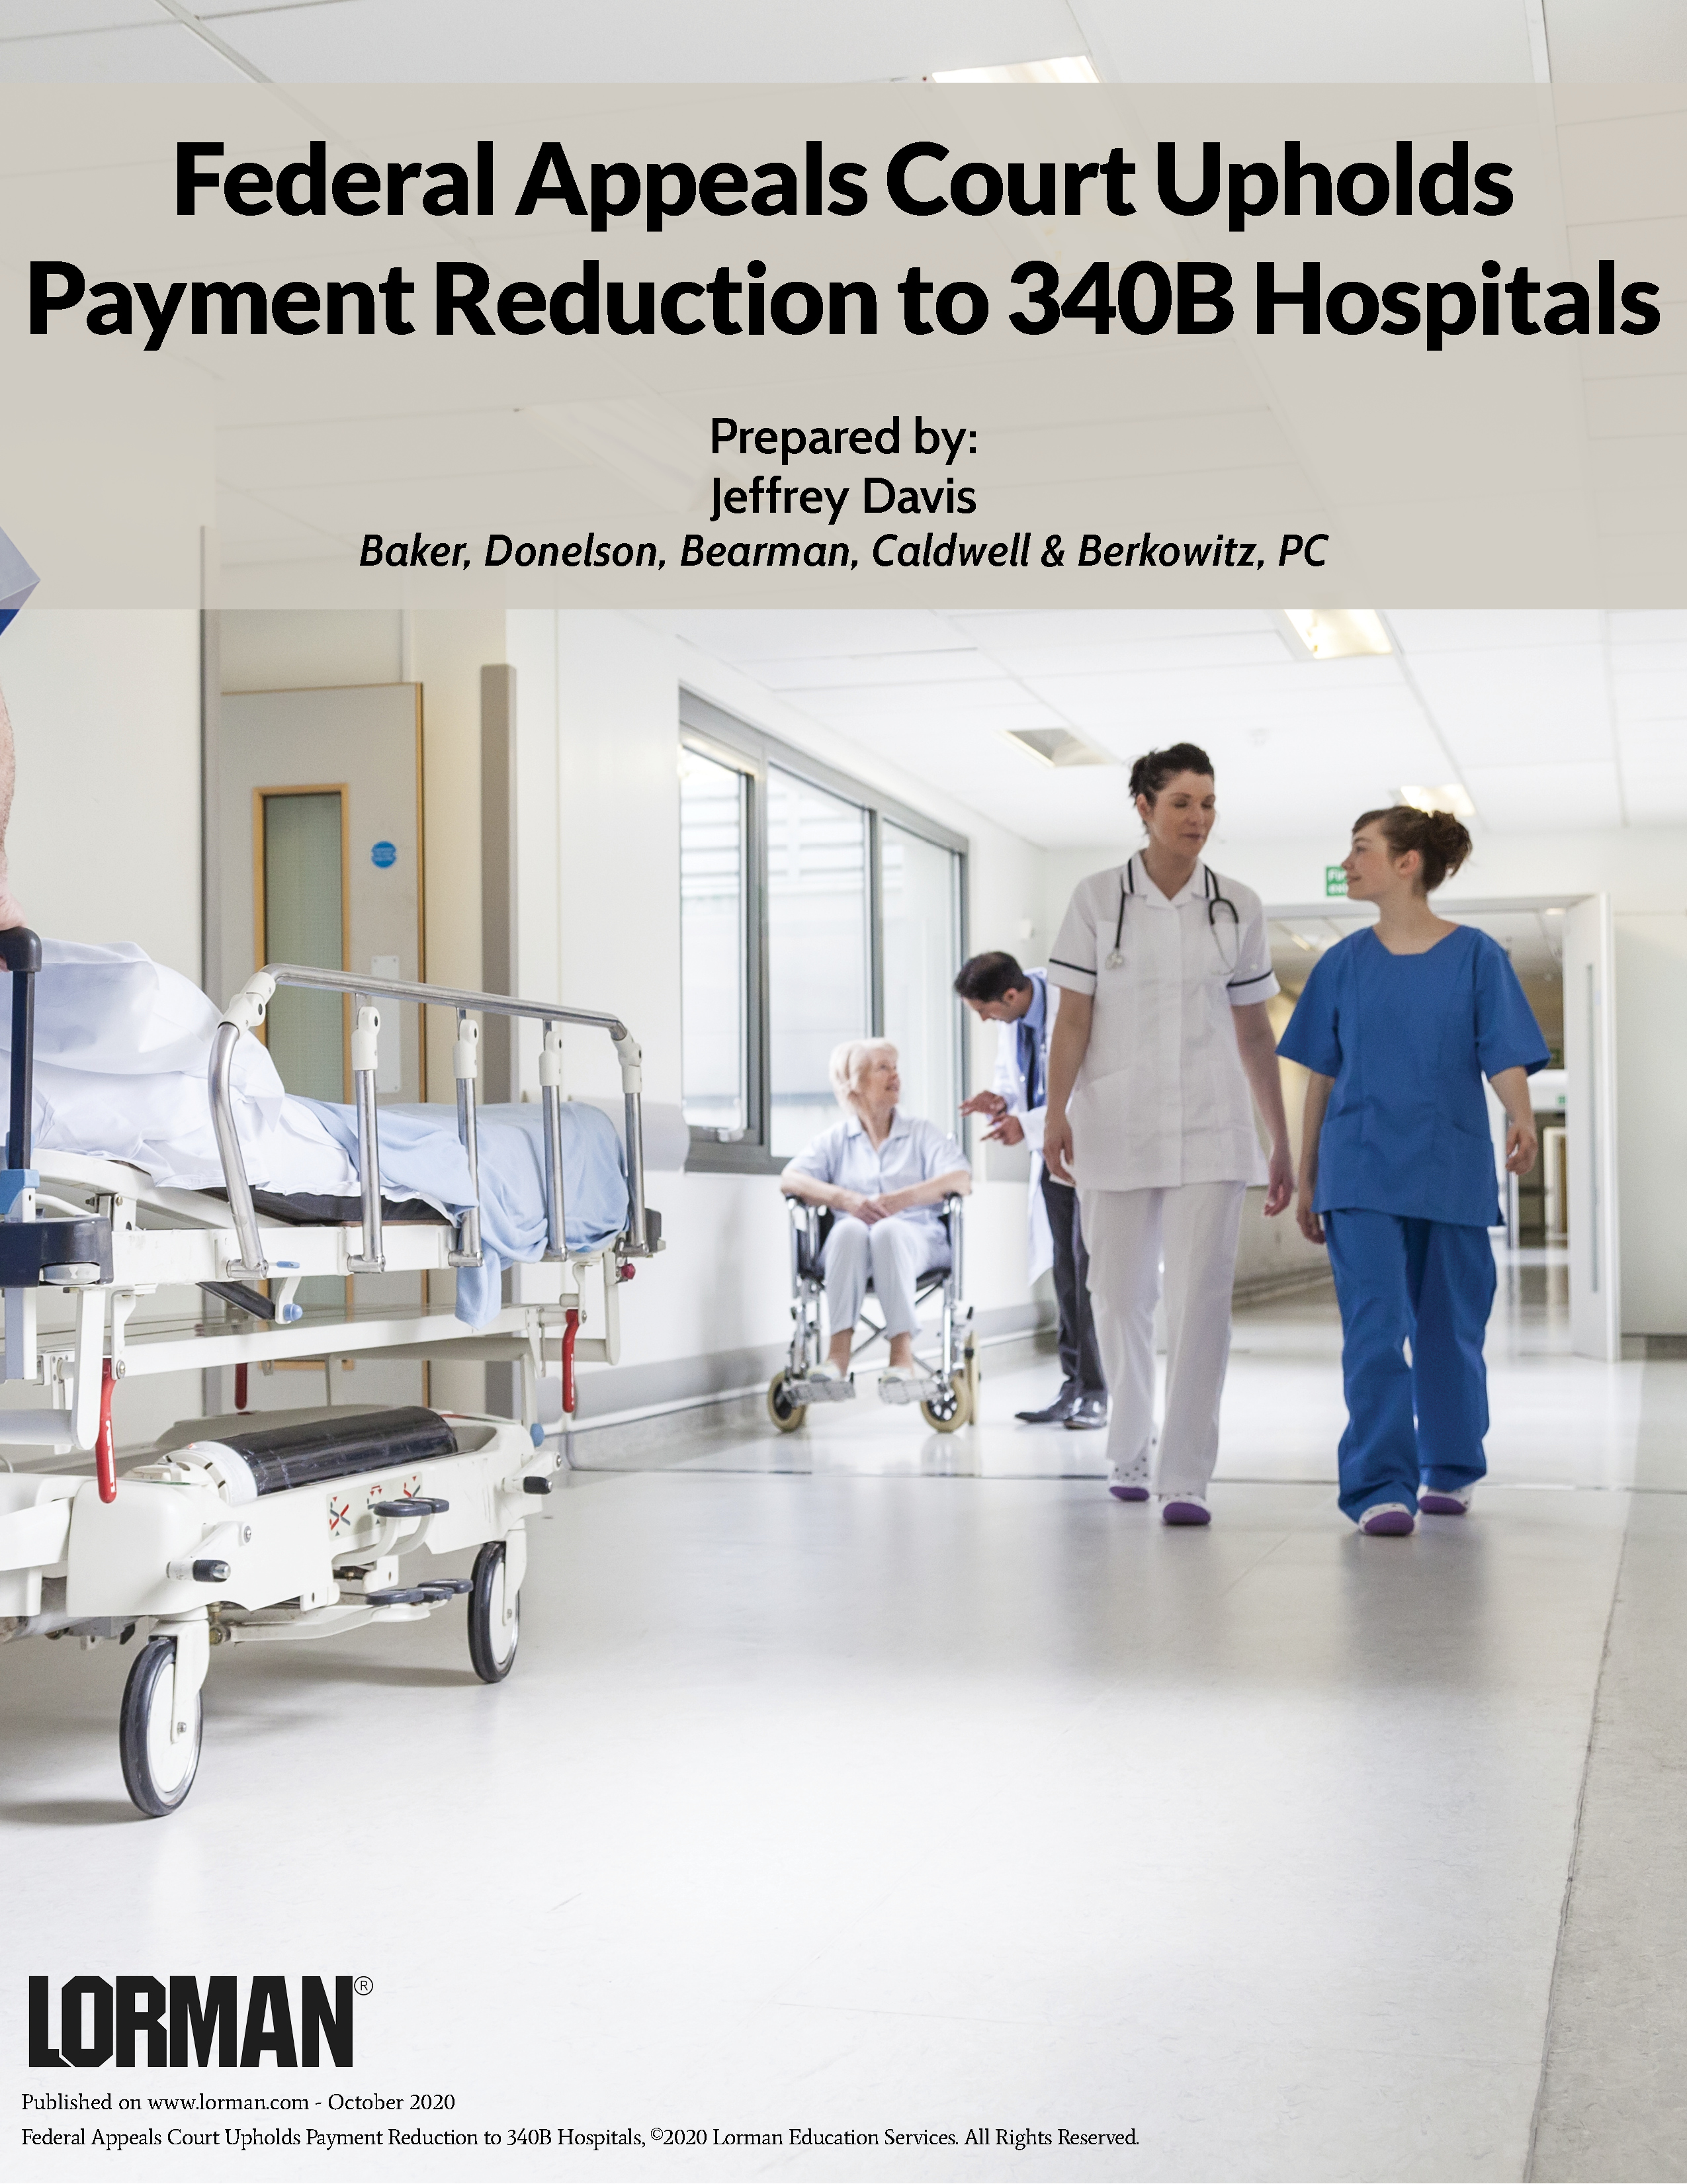 Federal Appeals Court Upholds Payment Reduction to 340B Hospitals